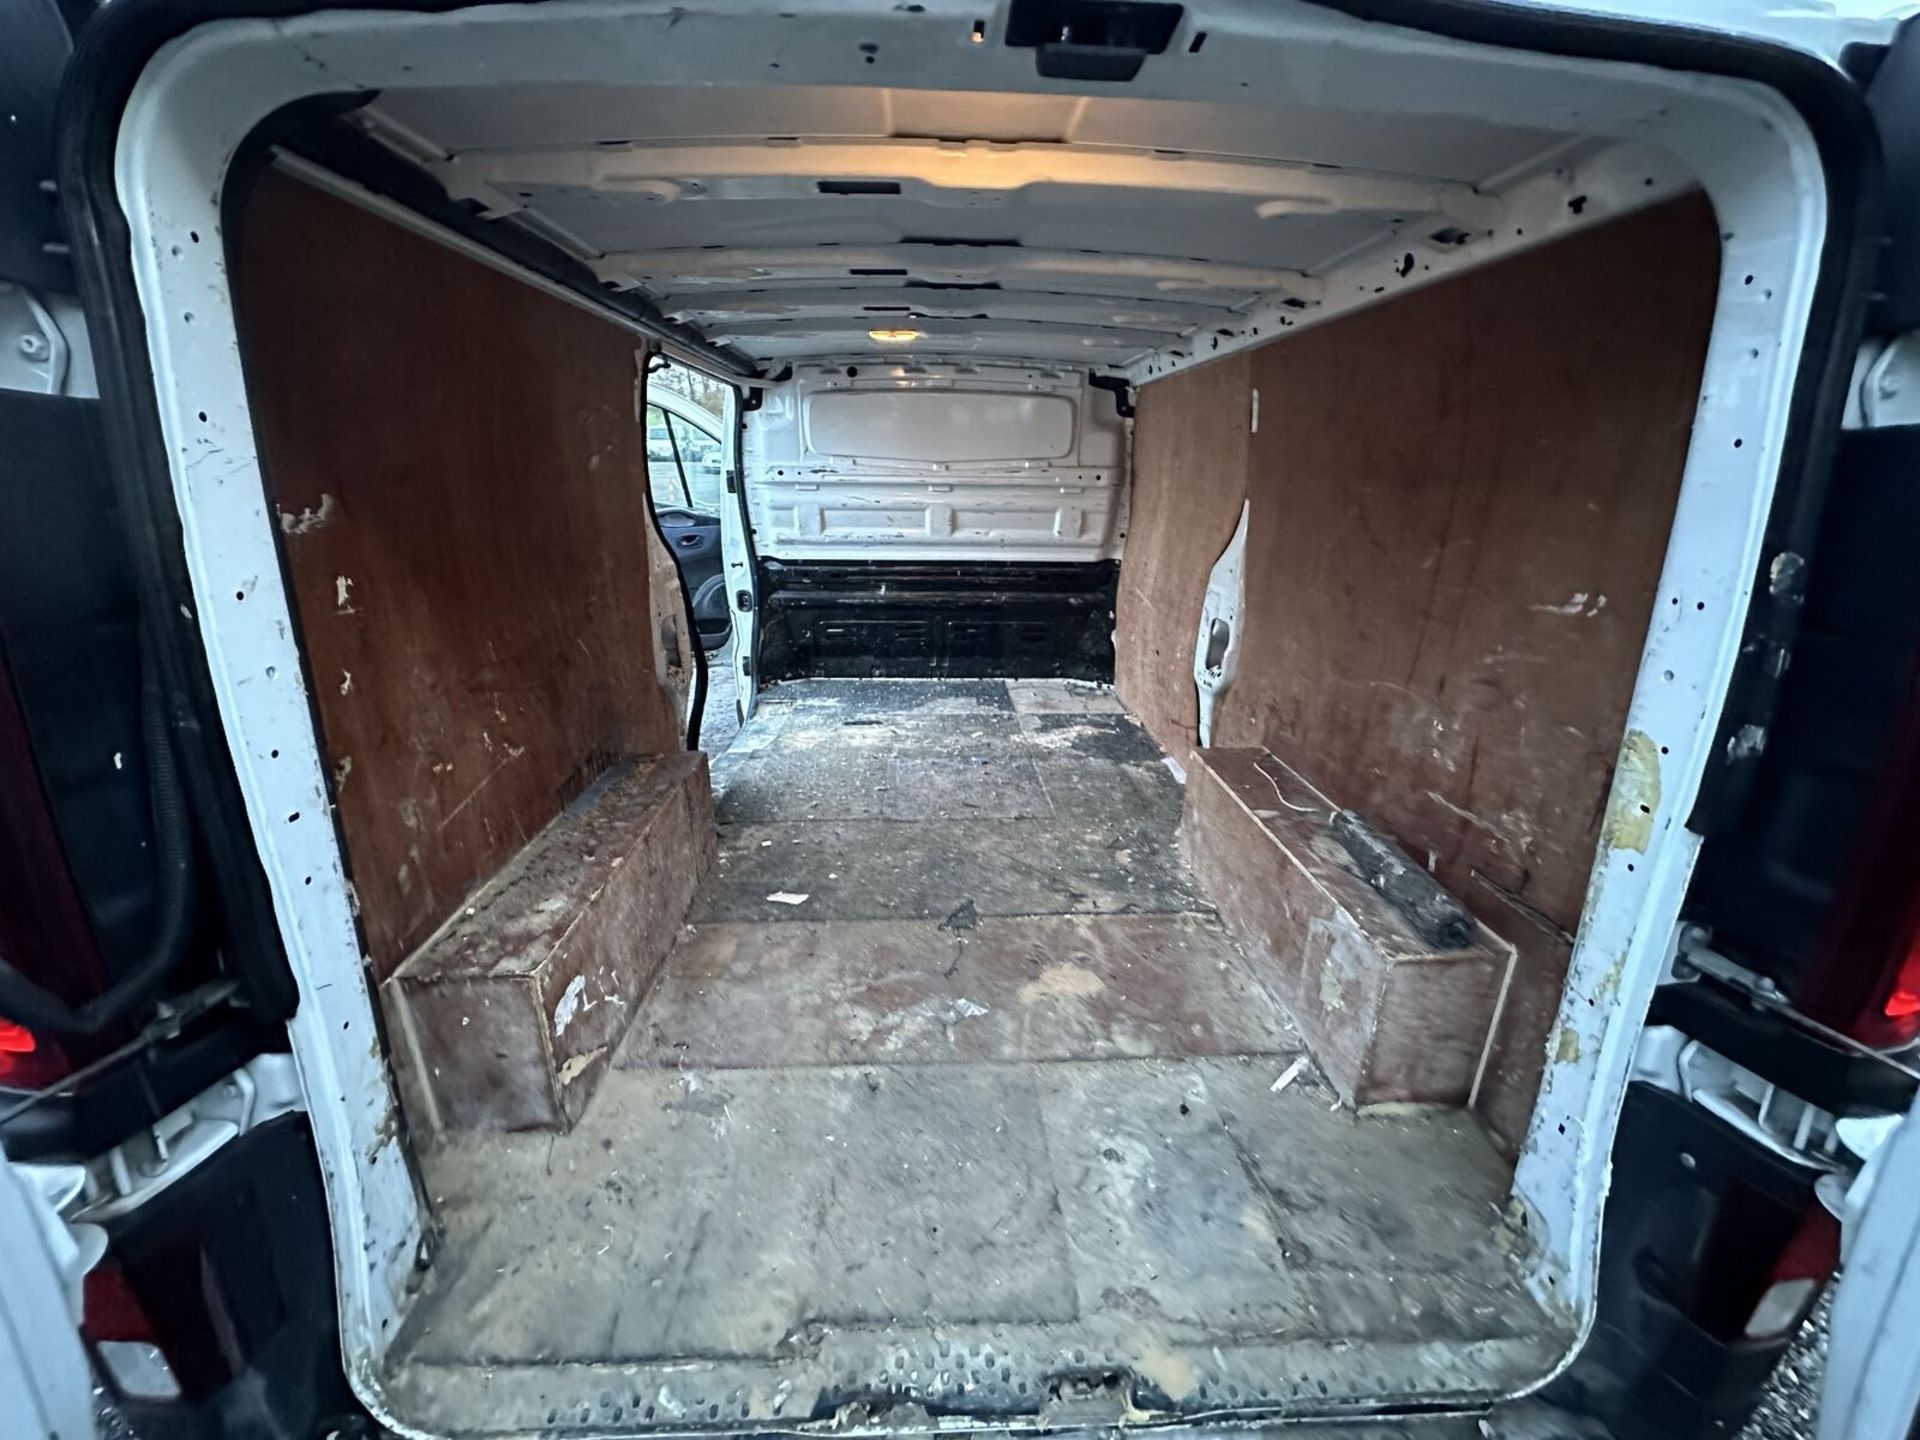 AFFORDABLE REPAIR: VAUXHALL VIVARO WITH POTENTIAL - Image 10 of 21